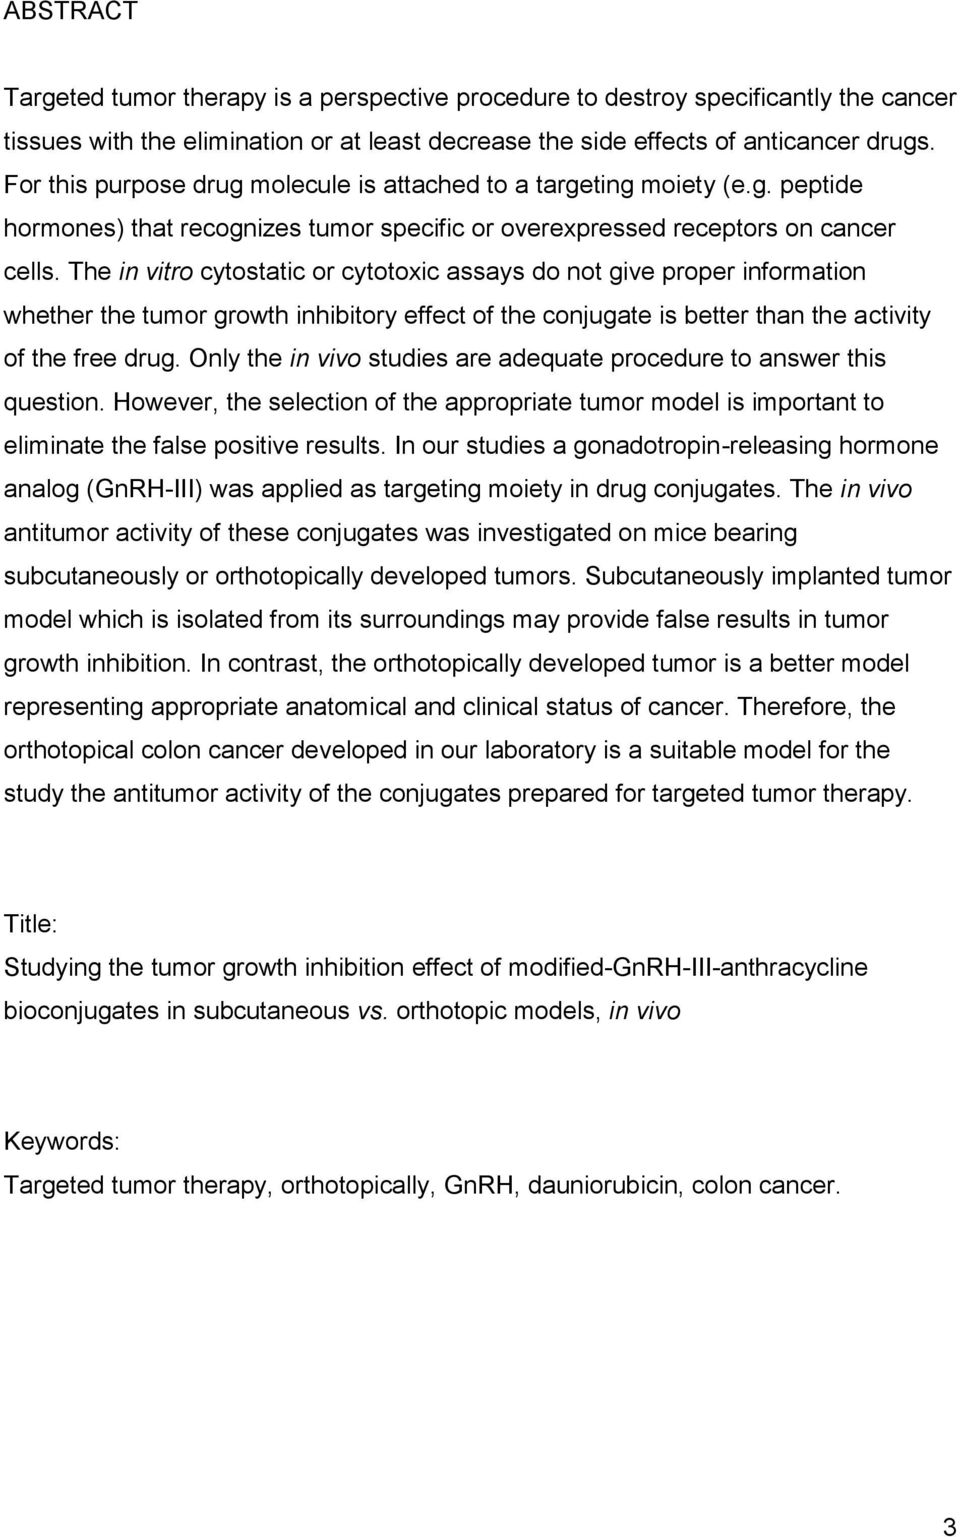 The in vitro cytostatic or cytotoxic assays do not give proper information whether the tumor growth inhibitory effect of the conjugate is better than the activity of the free drug.